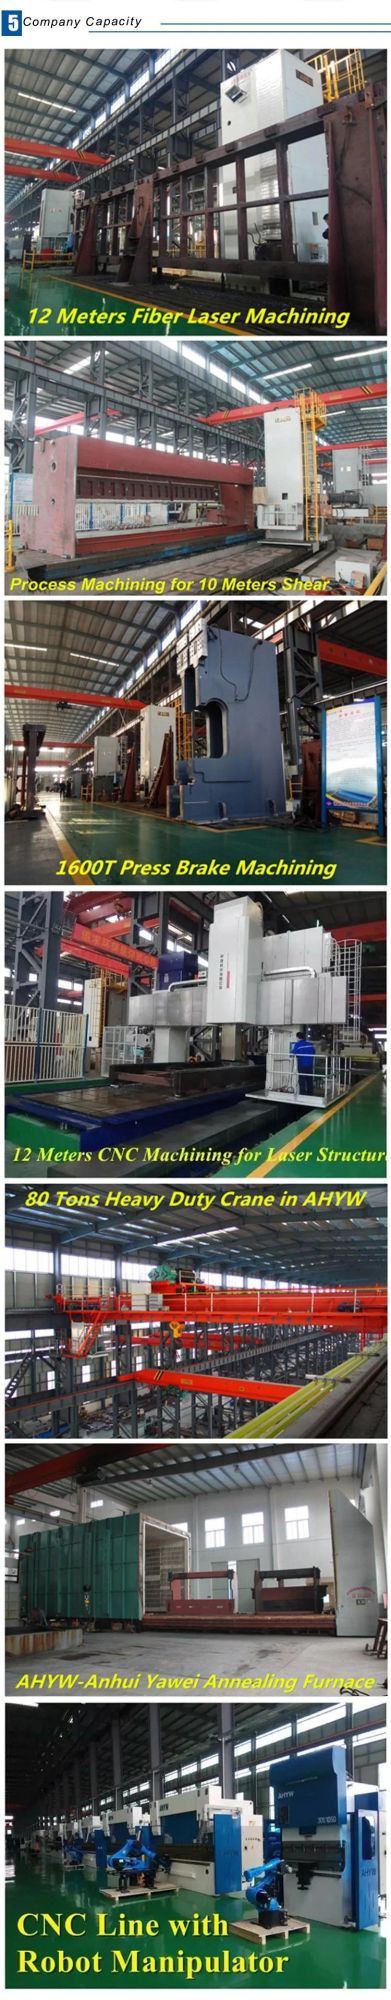 CNC Hydraulic Shearing Metal Cutting Machine for 4mm Thickness Plate